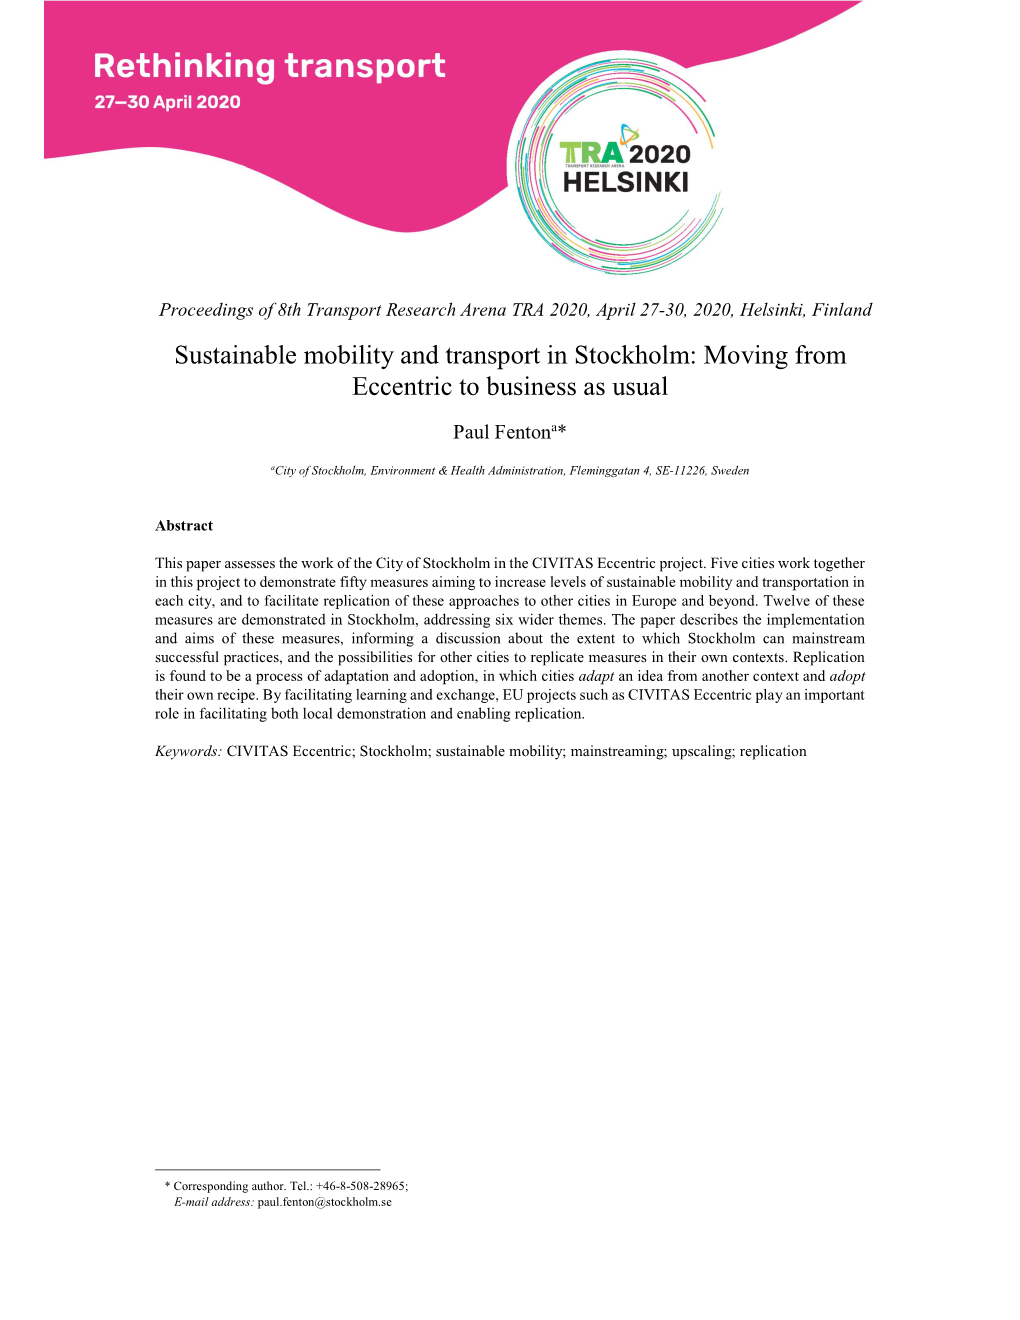 Sustainable Mobility and Transport in Stockholm: Moving from Eccentric to Business As Usual